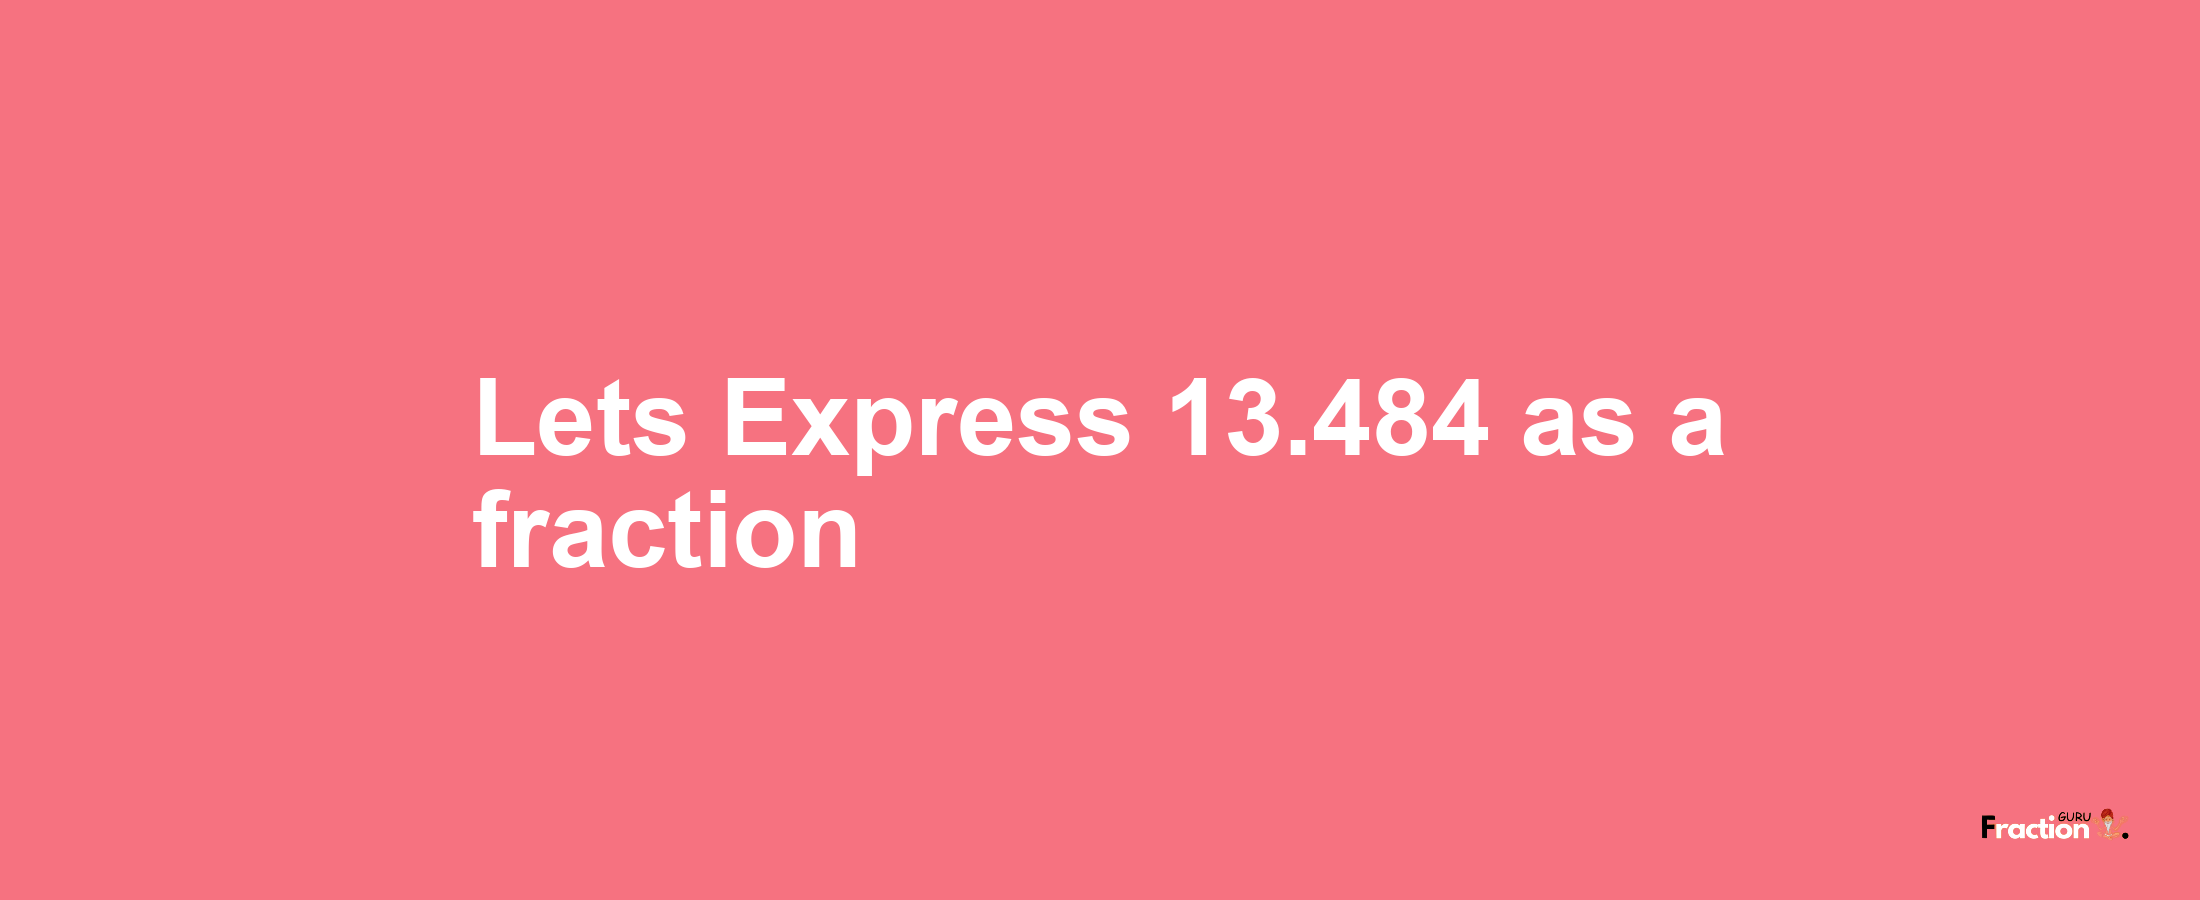 Lets Express 13.484 as afraction